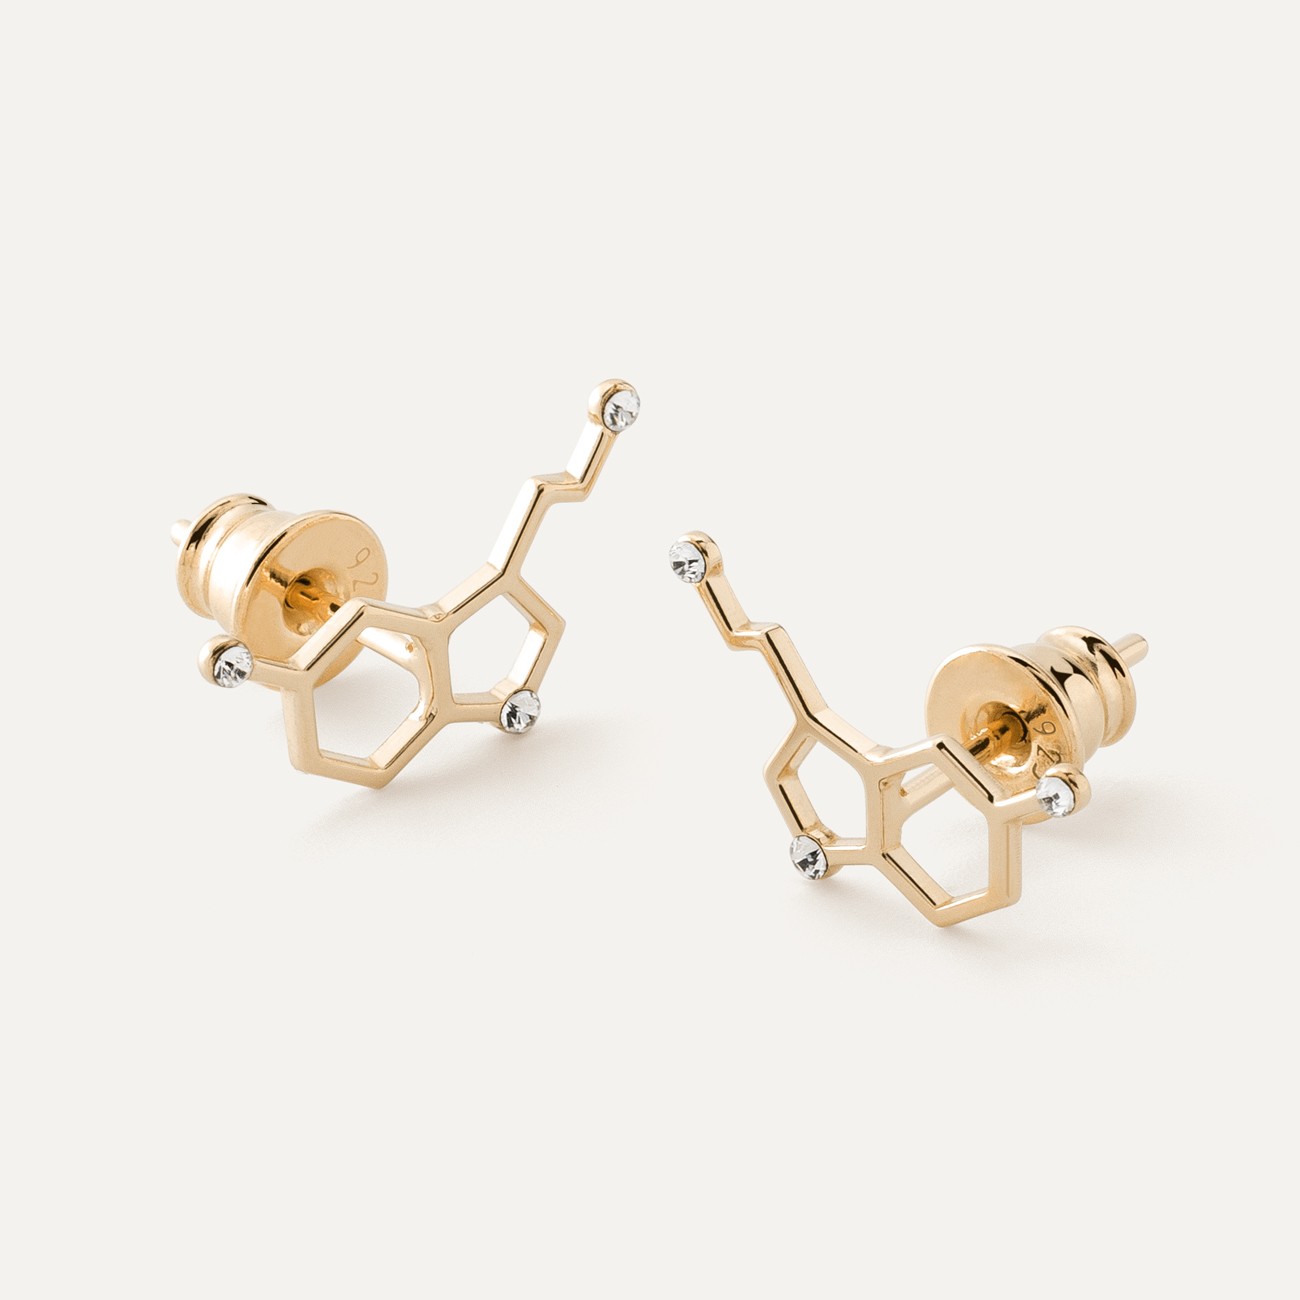 Serotonin earrings with crystals, Silver 925